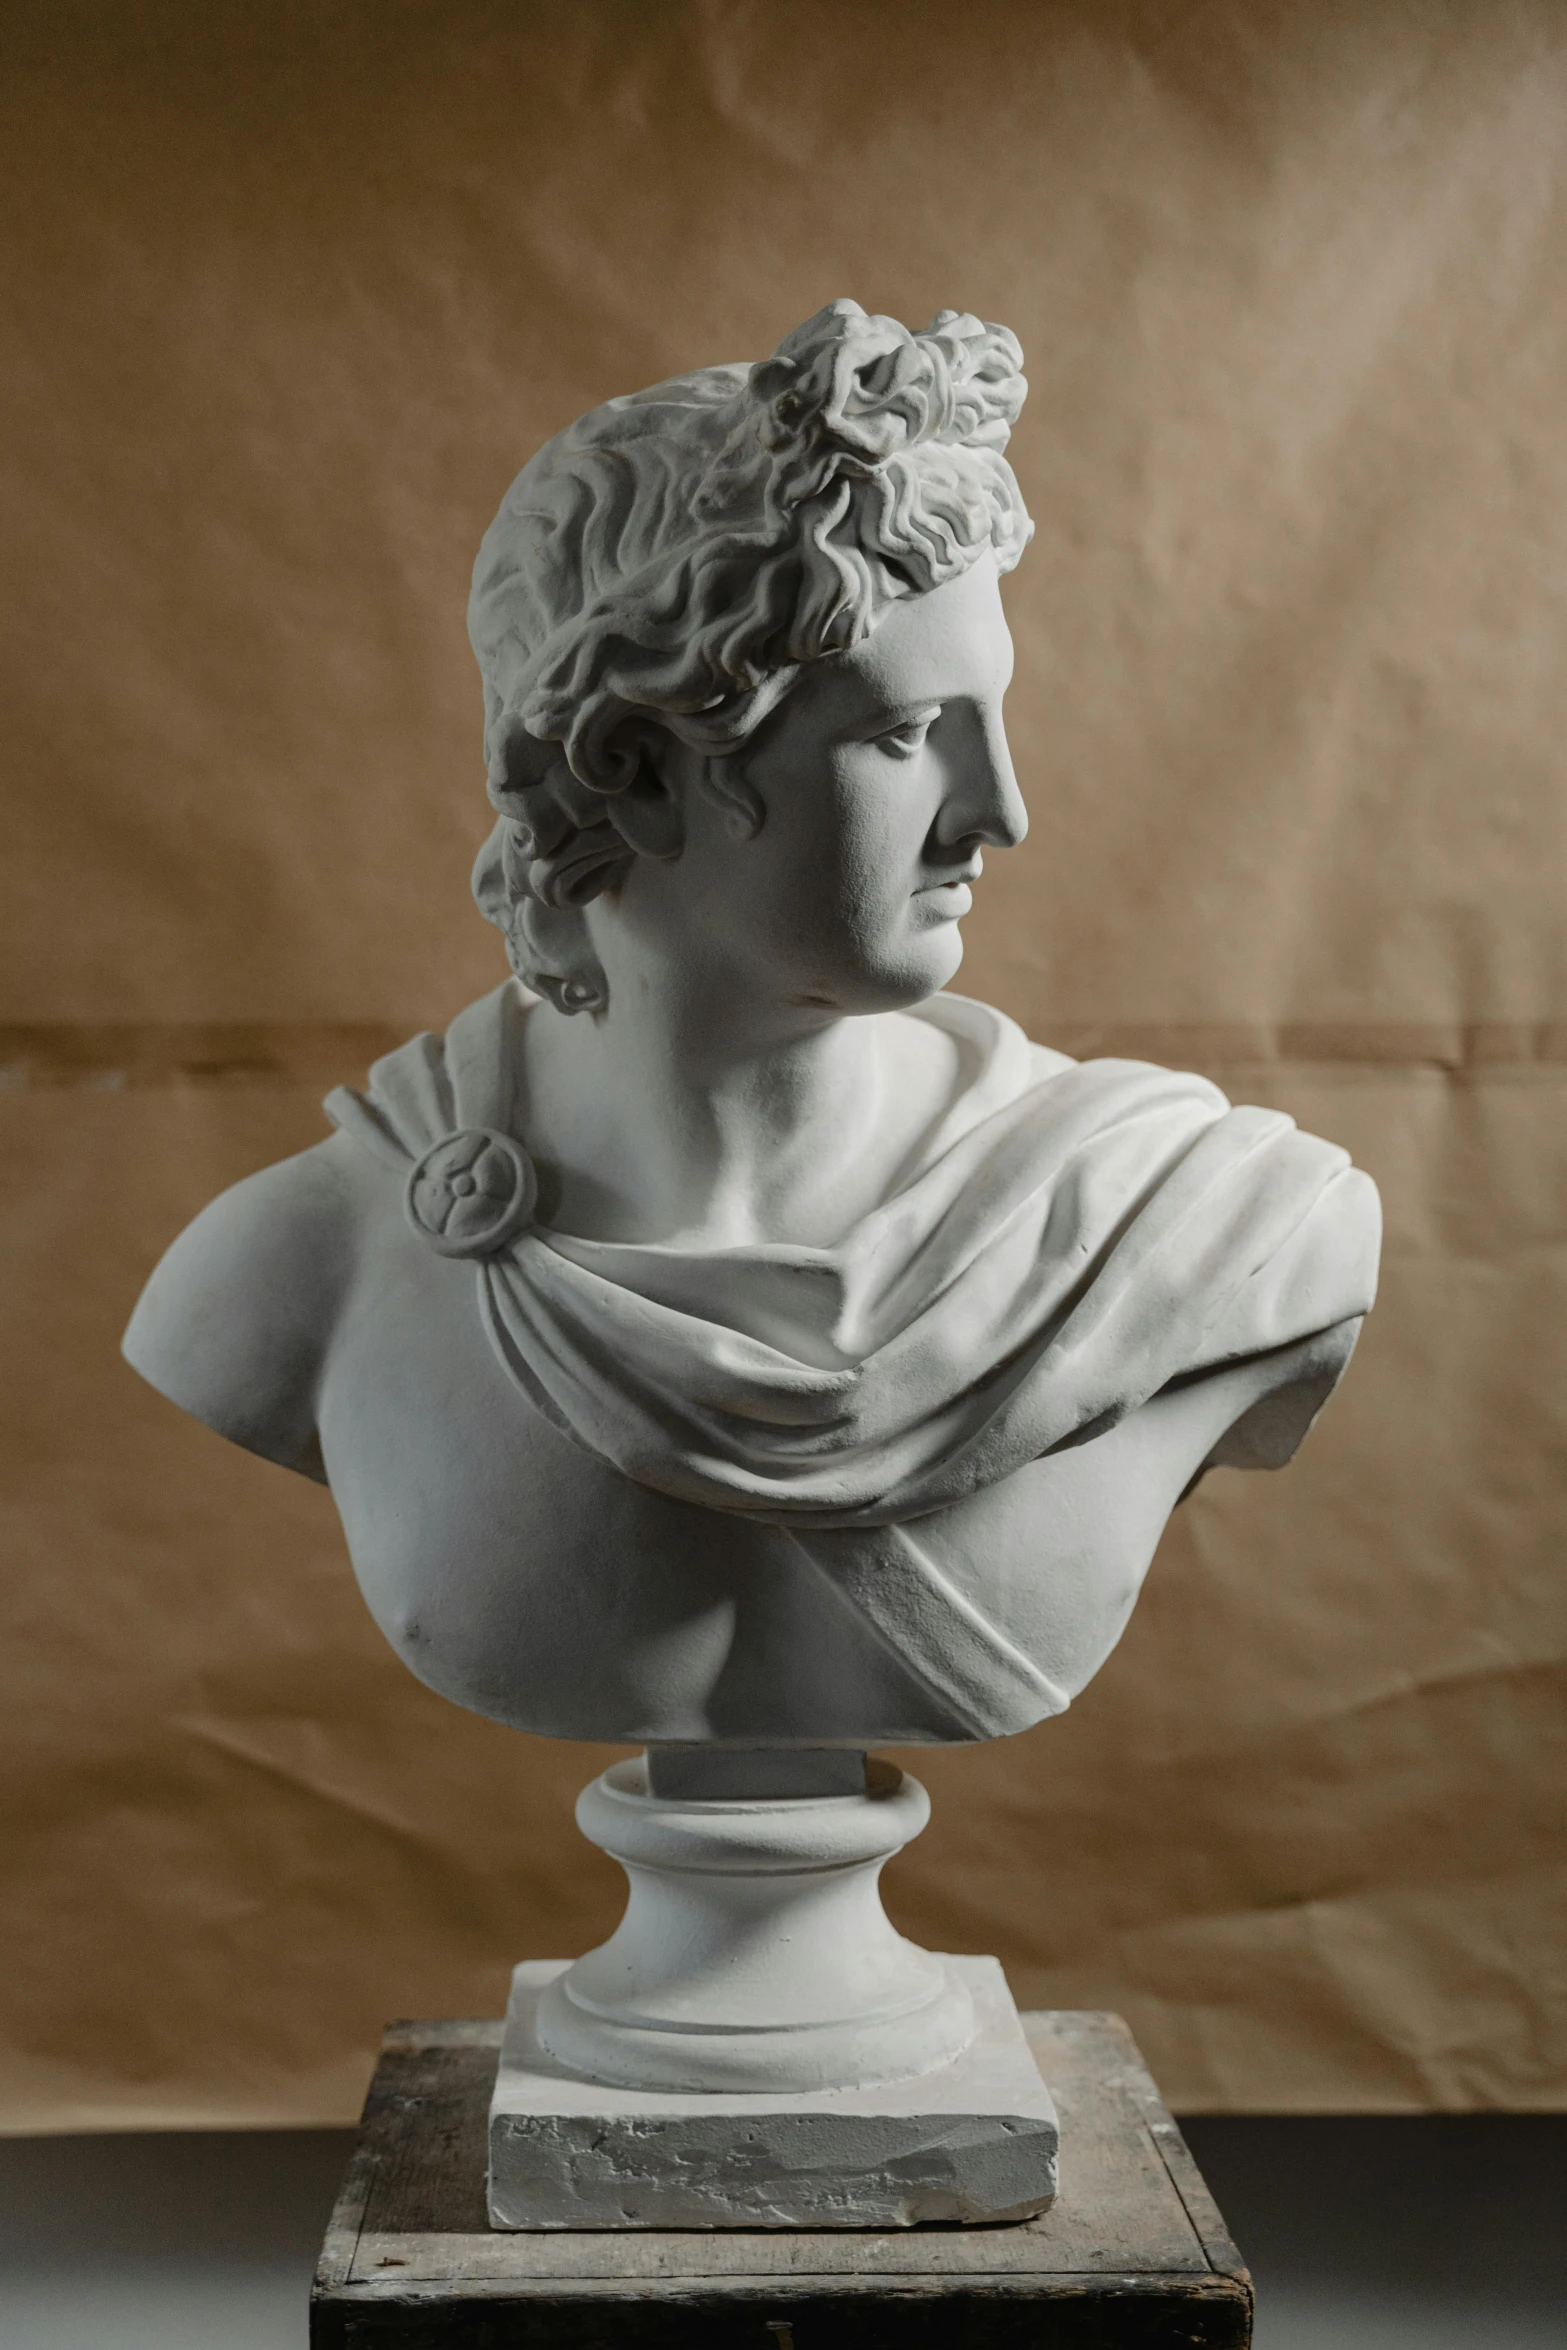 a black and white photo of a bust of a man, inspired by Antonio Canova, neoclassicism, photo courtesy museum of art, hero prop, alexander the great, upscaled to high resolution